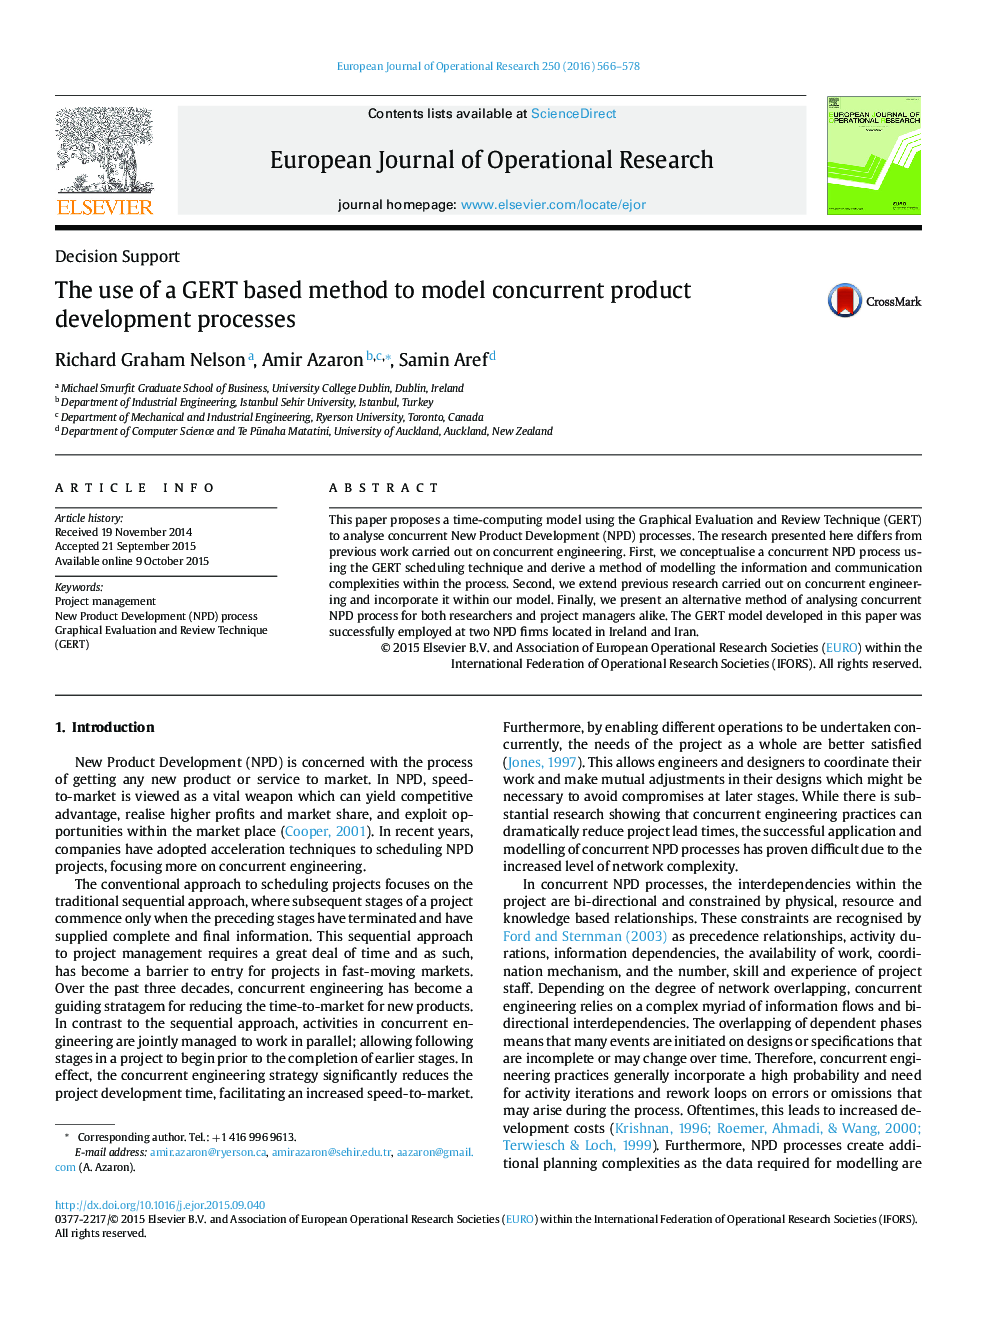 The use of a GERT based method to model concurrent product development processes